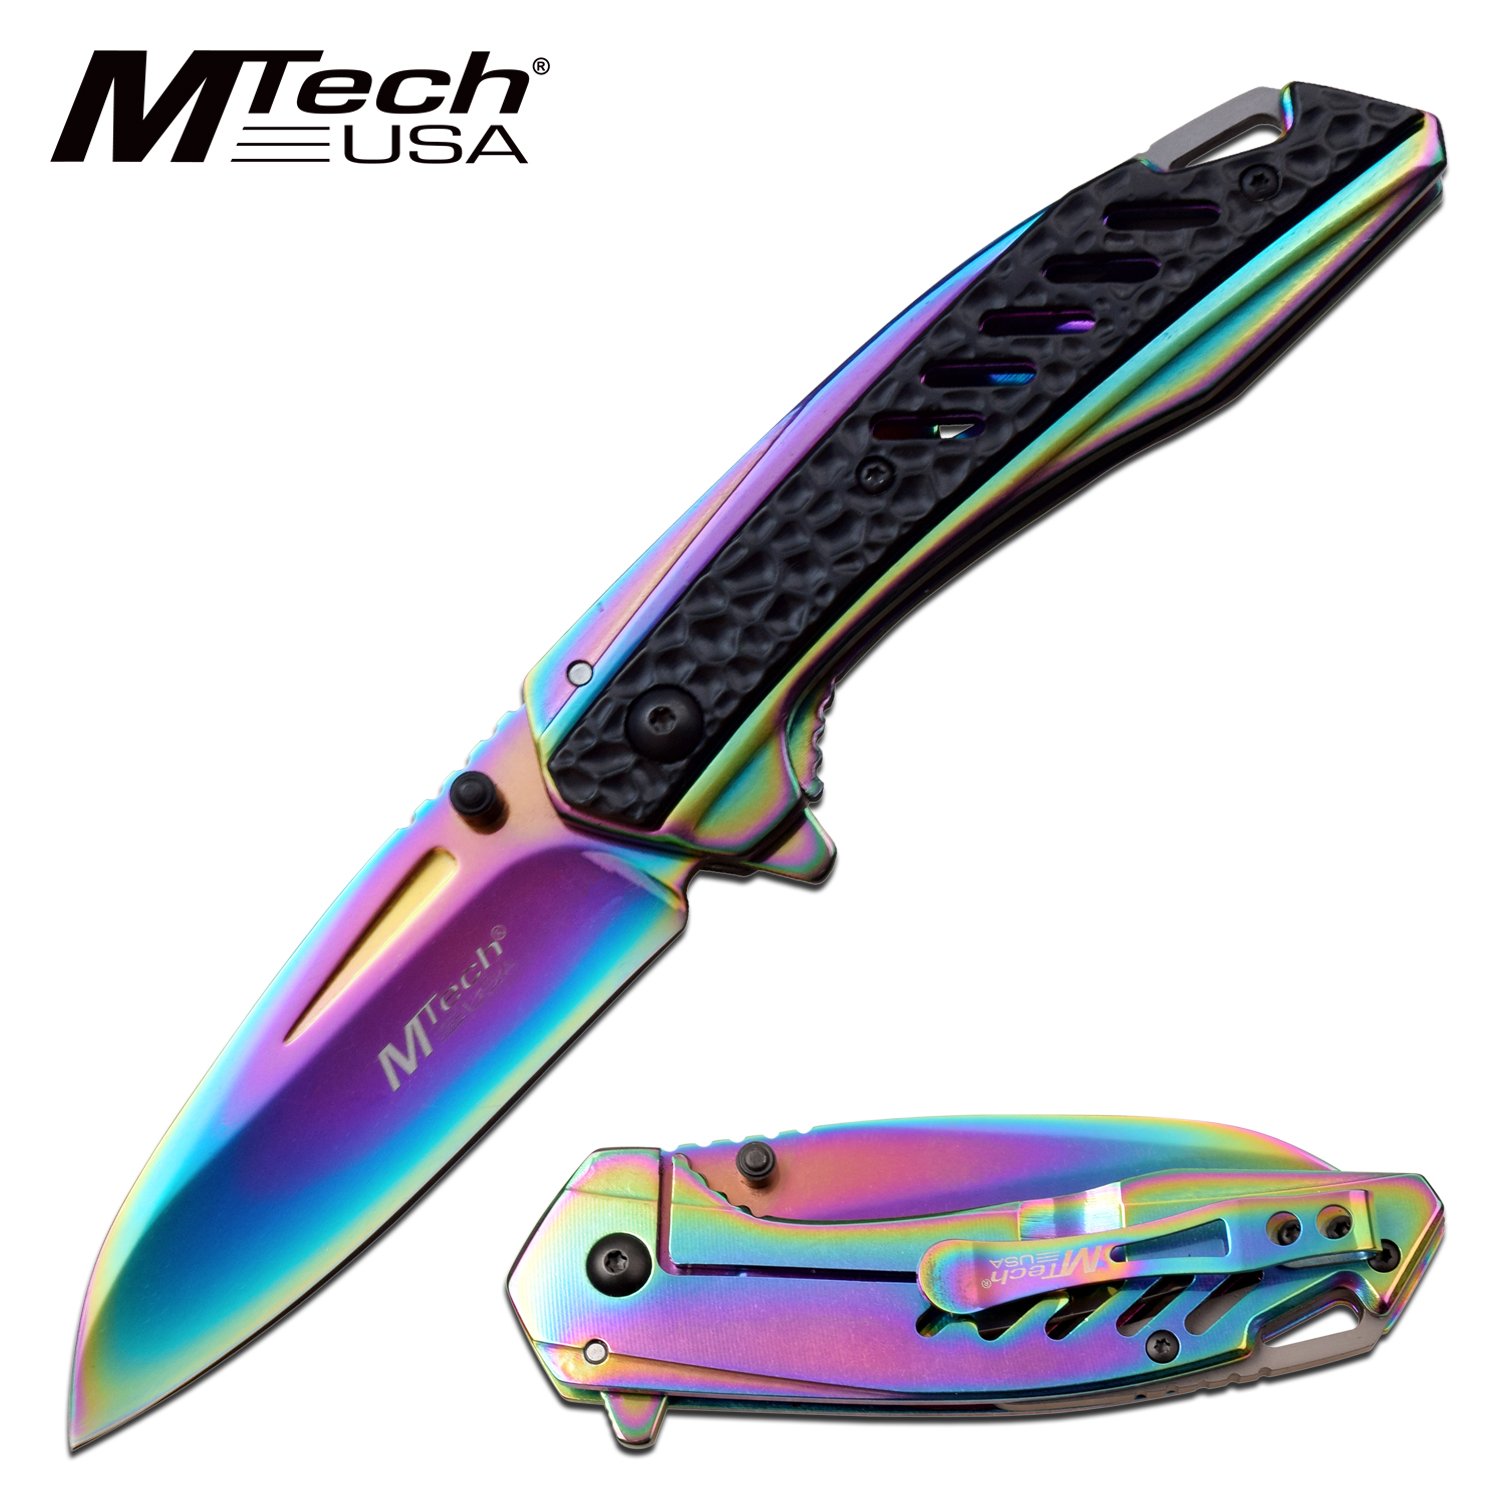 Spring-Assist Folding Knife Mtech Tactical Rainbow Wharncliffe Blade Black EDC